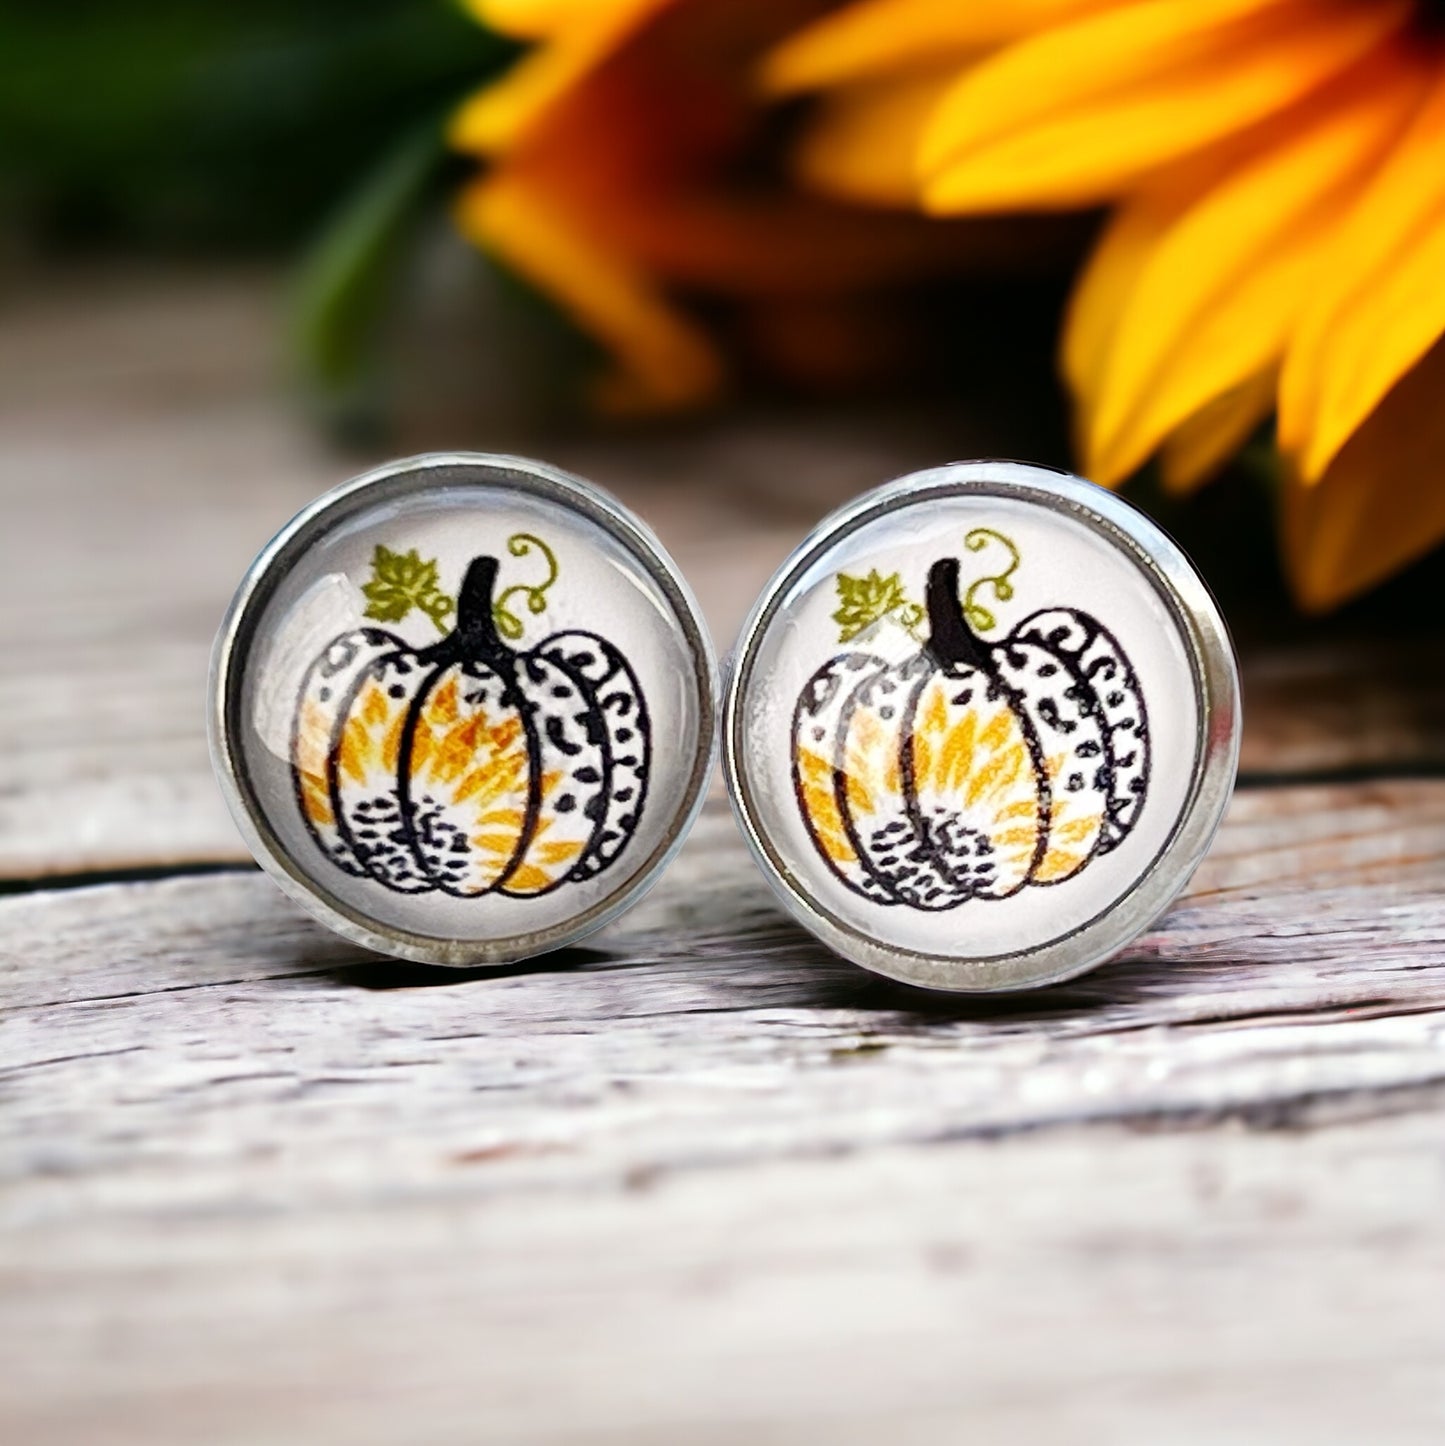 Pumpkin & Sunflower Silver Stud Earrings: Unique Autumn Accents for Your Style